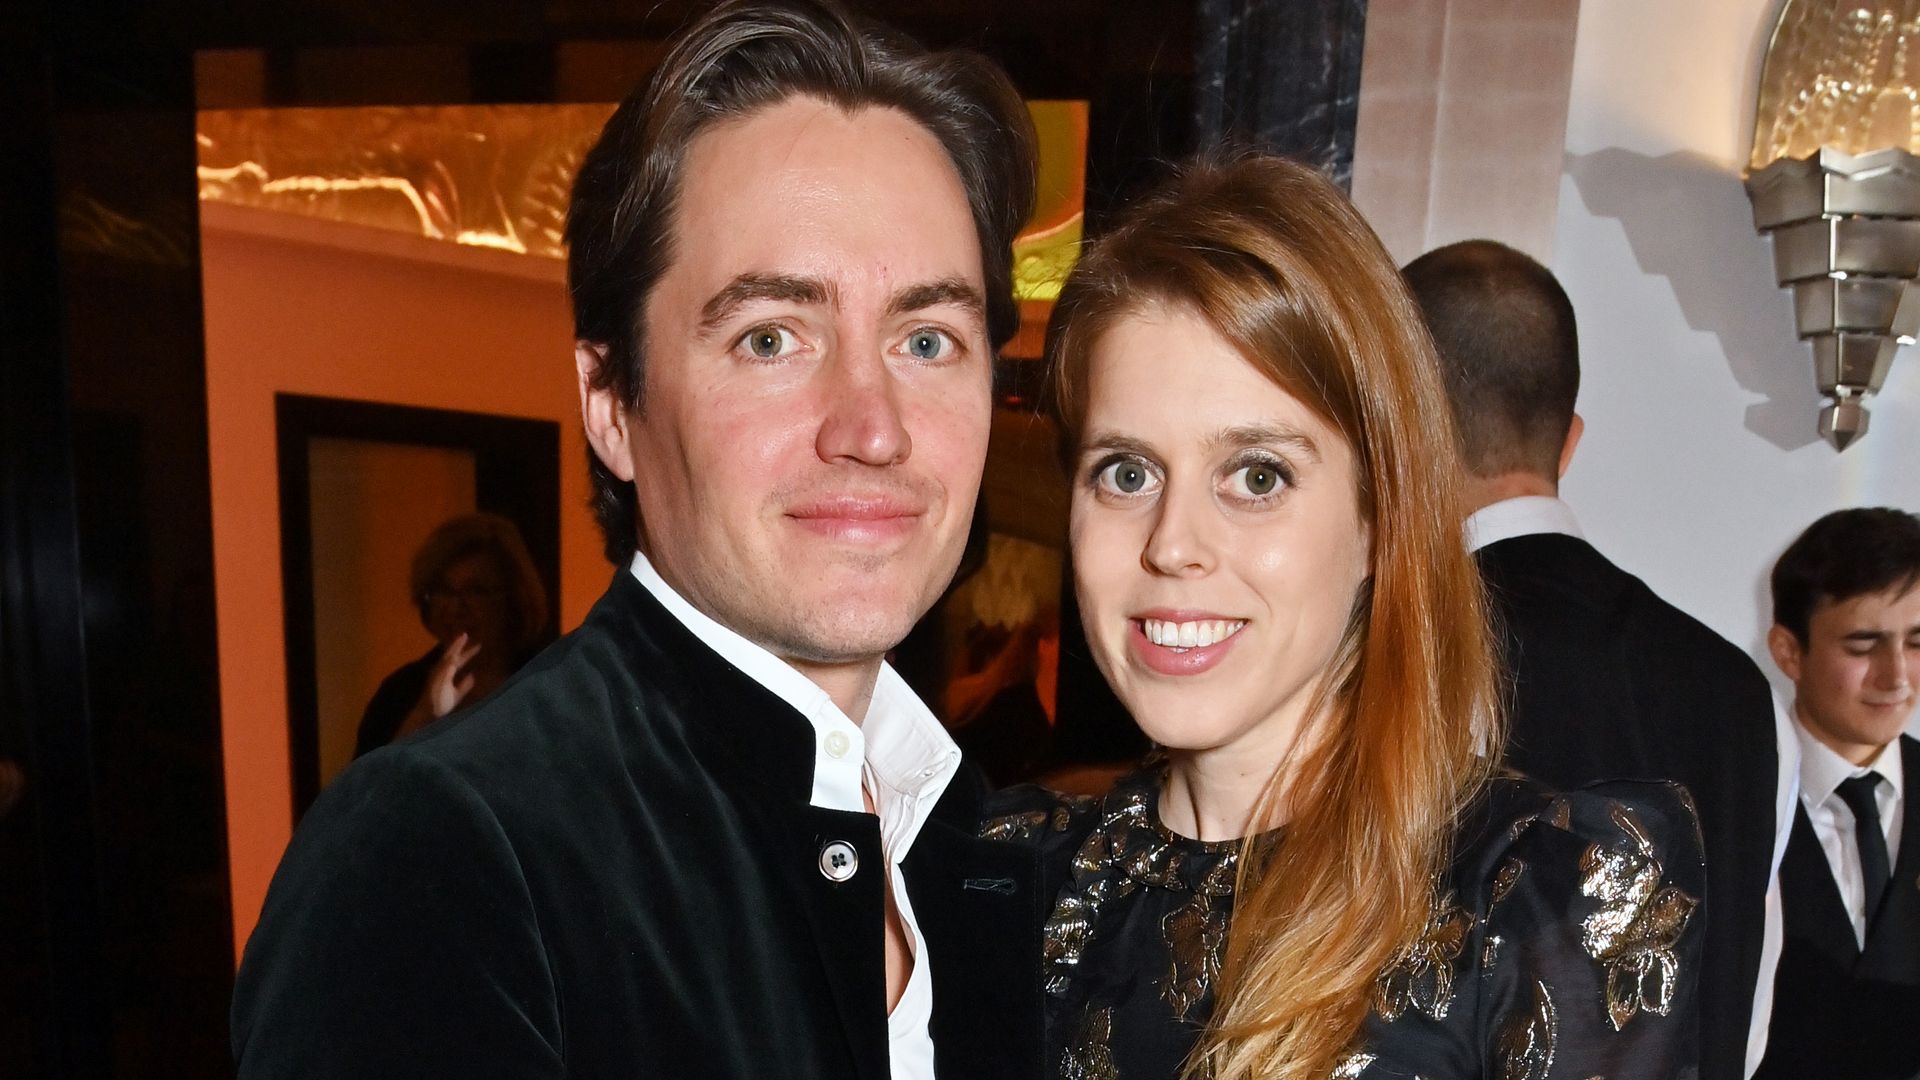 Princess Beatrice and Edoardo Mapelli Mozzi welcomed their daughter in September 2021